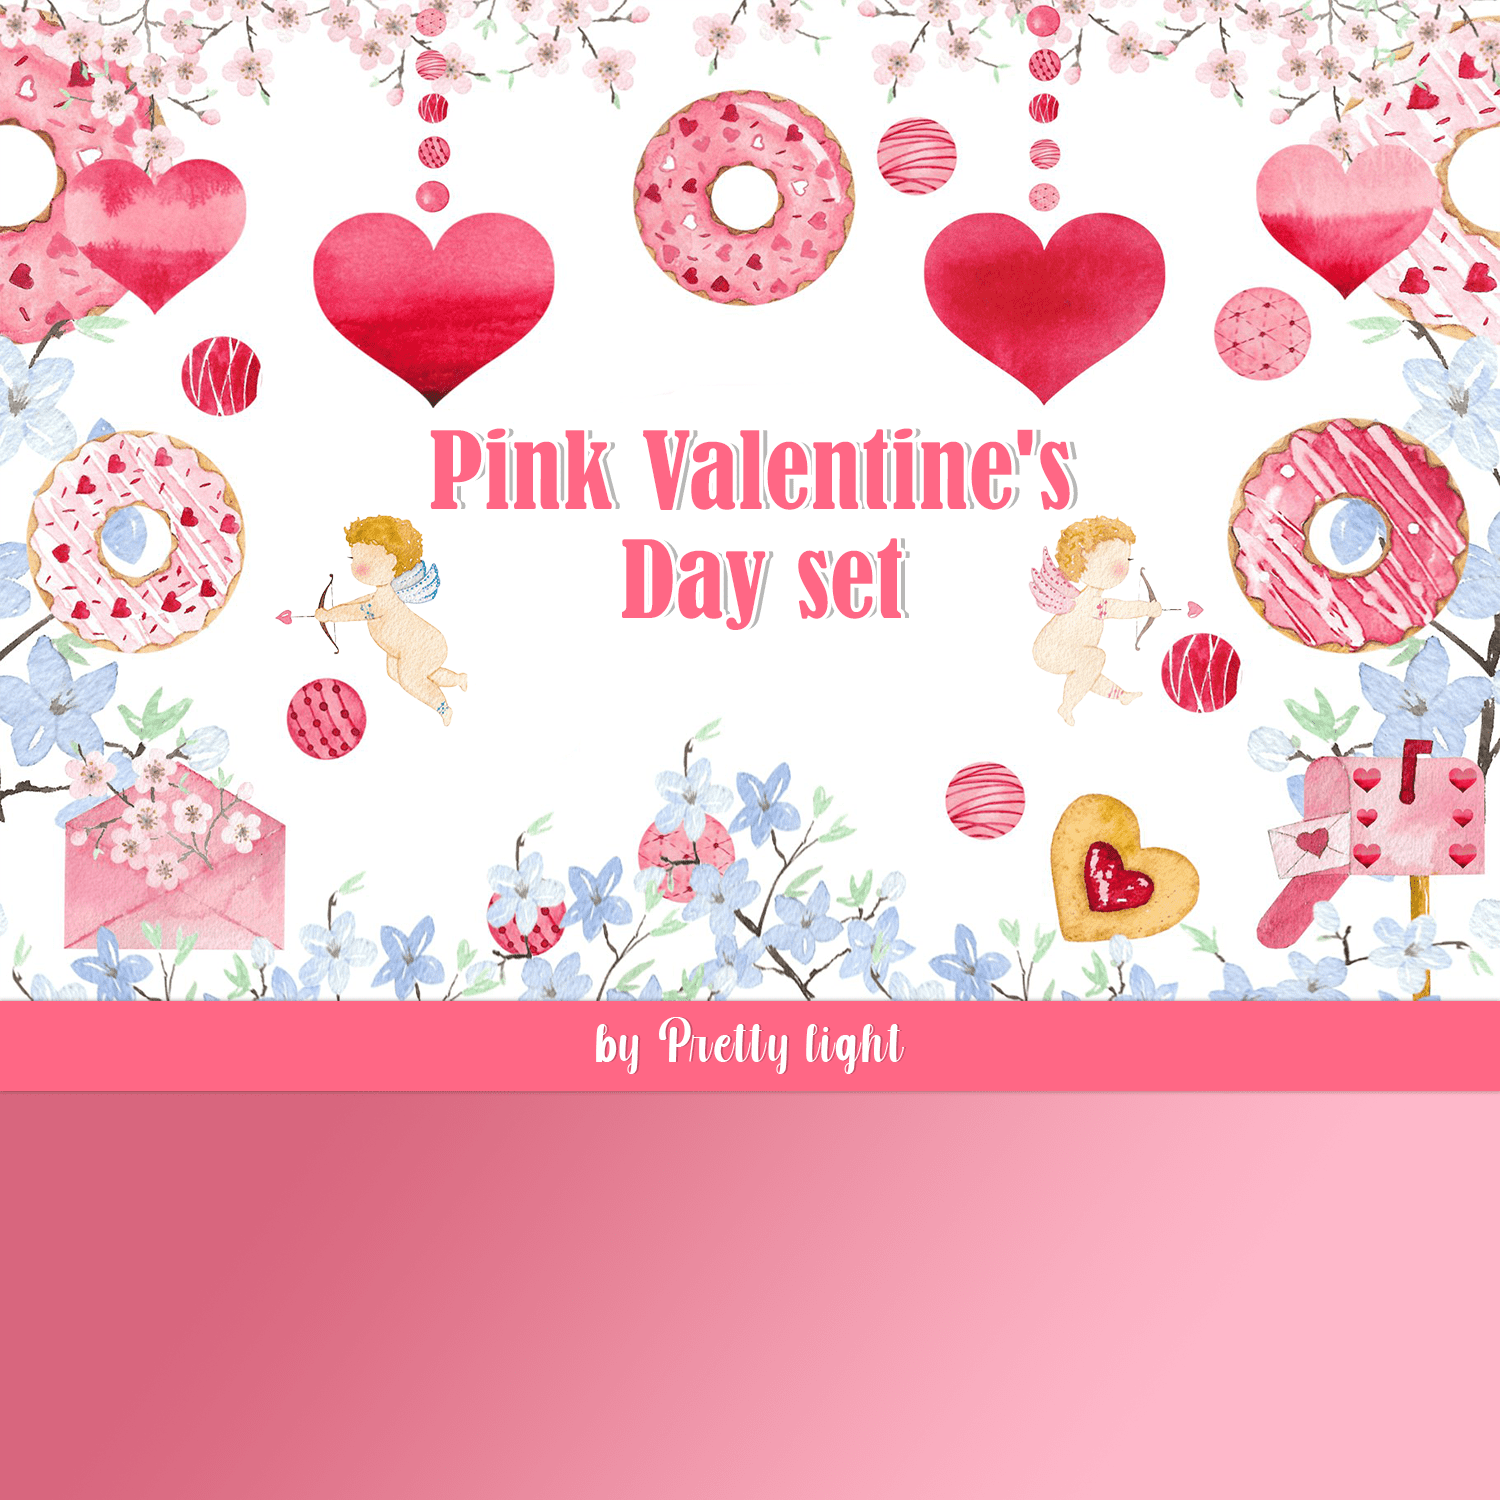 Pink Valentine's Day Set - main image preview.